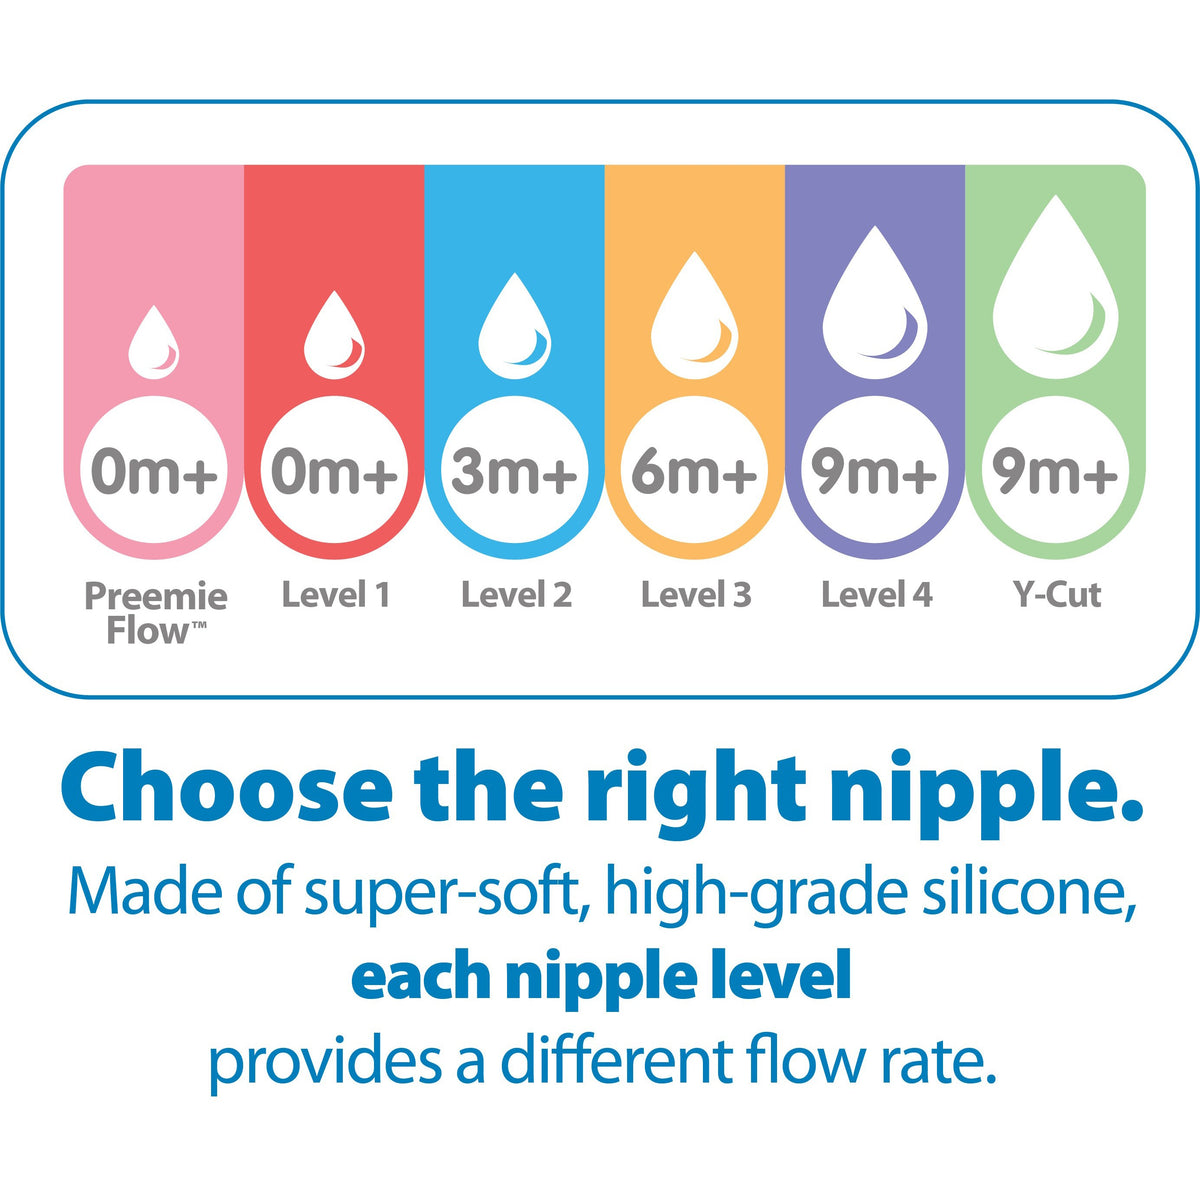 dr-browns-options+-breast-like-silicone-nipples-2s-y-cut-usa-9m+- (3)